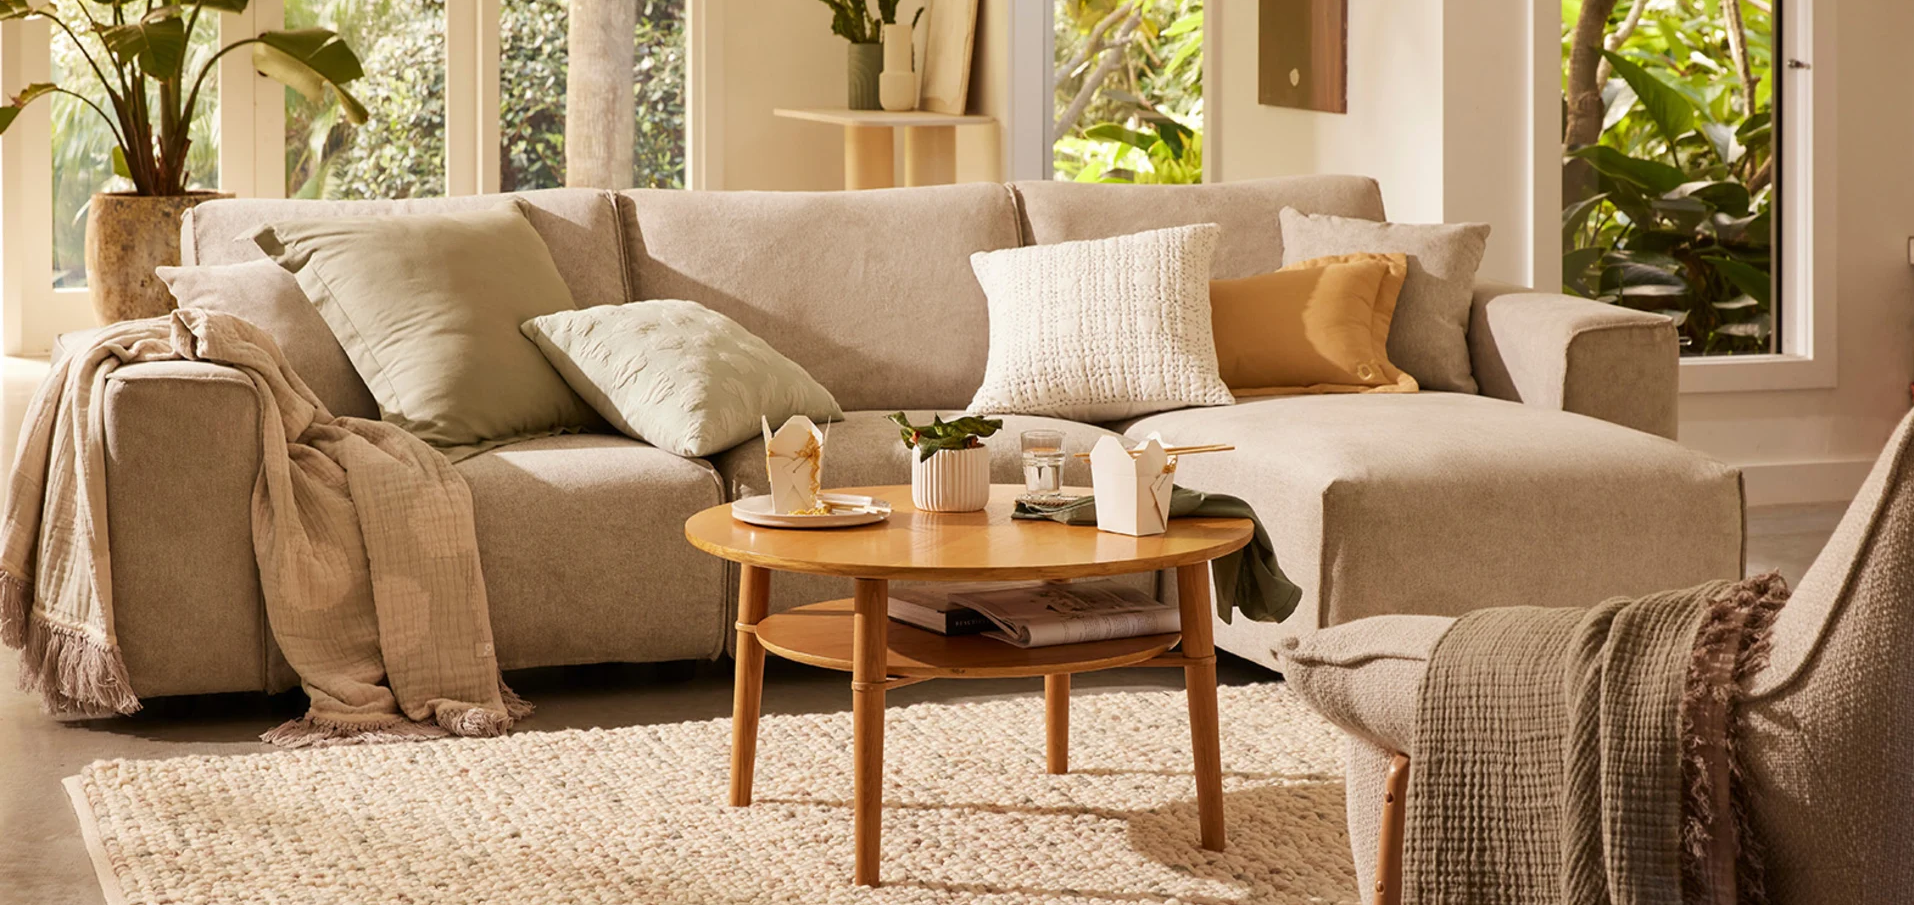 Up to 50% OFF on clearance sofa, beds & more at Koala